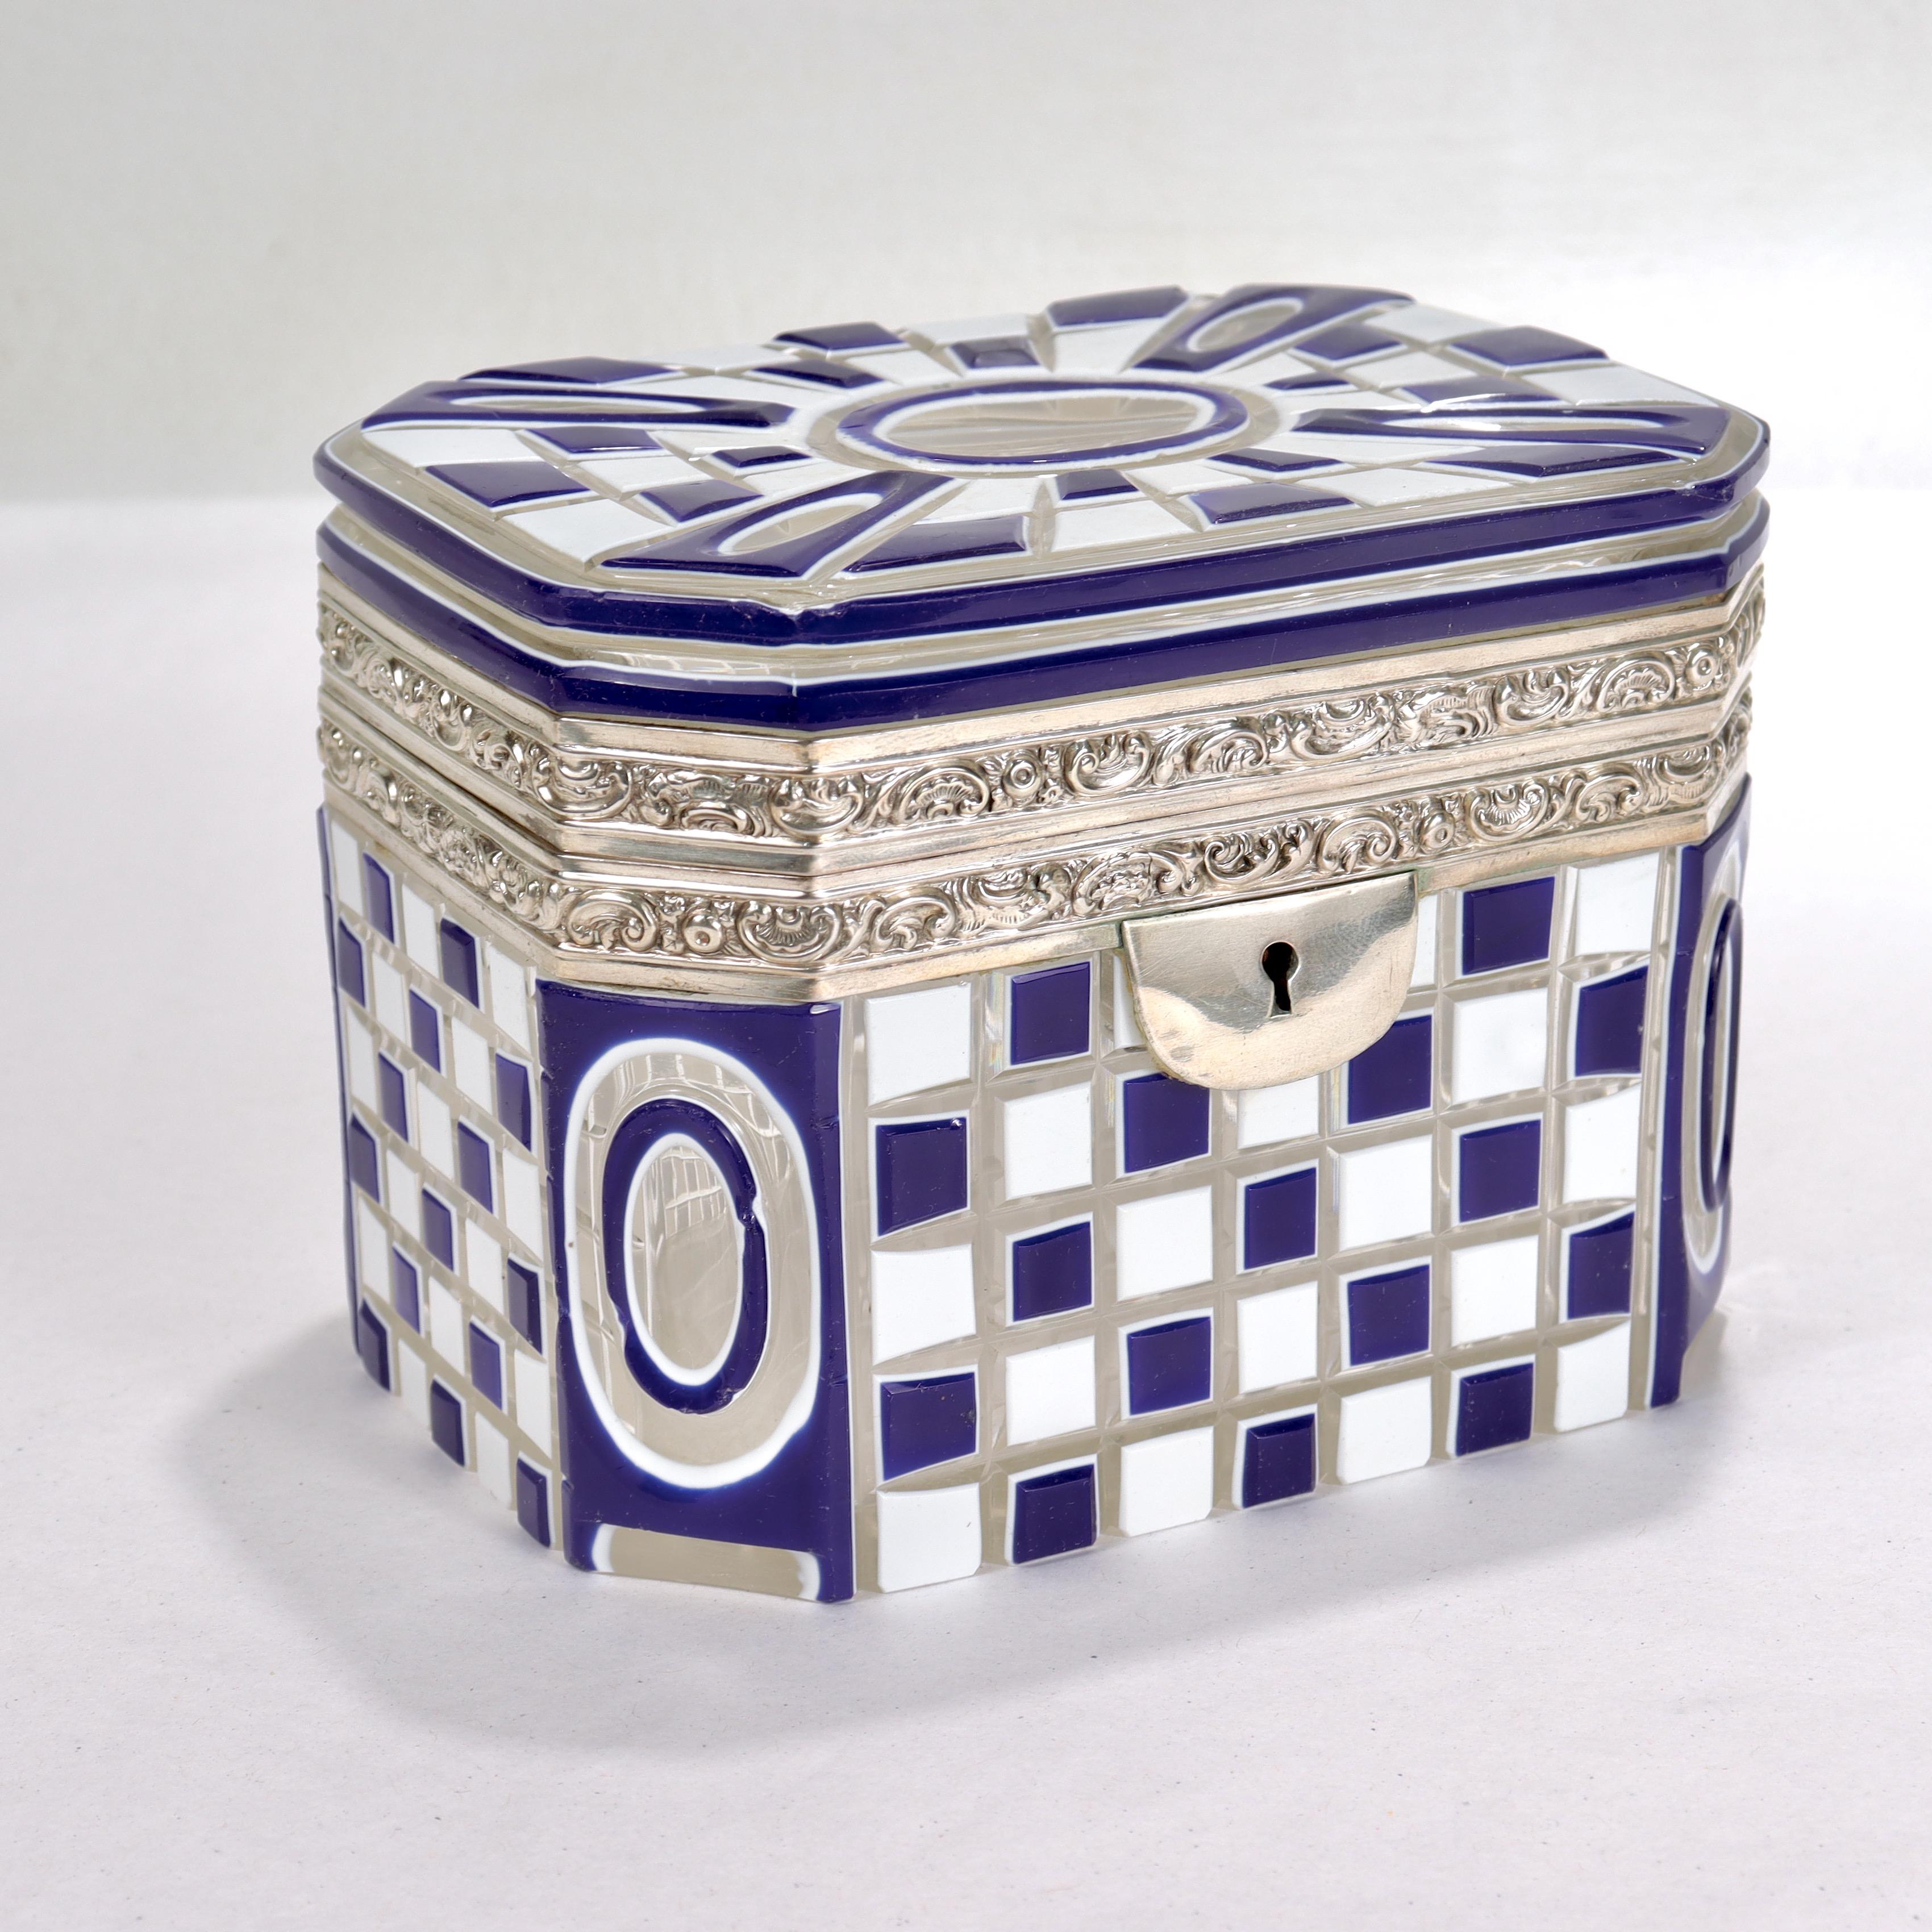 A fine antique Bohemian glass box or casket.

With an incredibly rare cut-to-clear two-color overlay design. 

The cut resembles machine turning with alternating blue & white checkboard patterns cuts to the sides and bullseye cuts to the chamfered